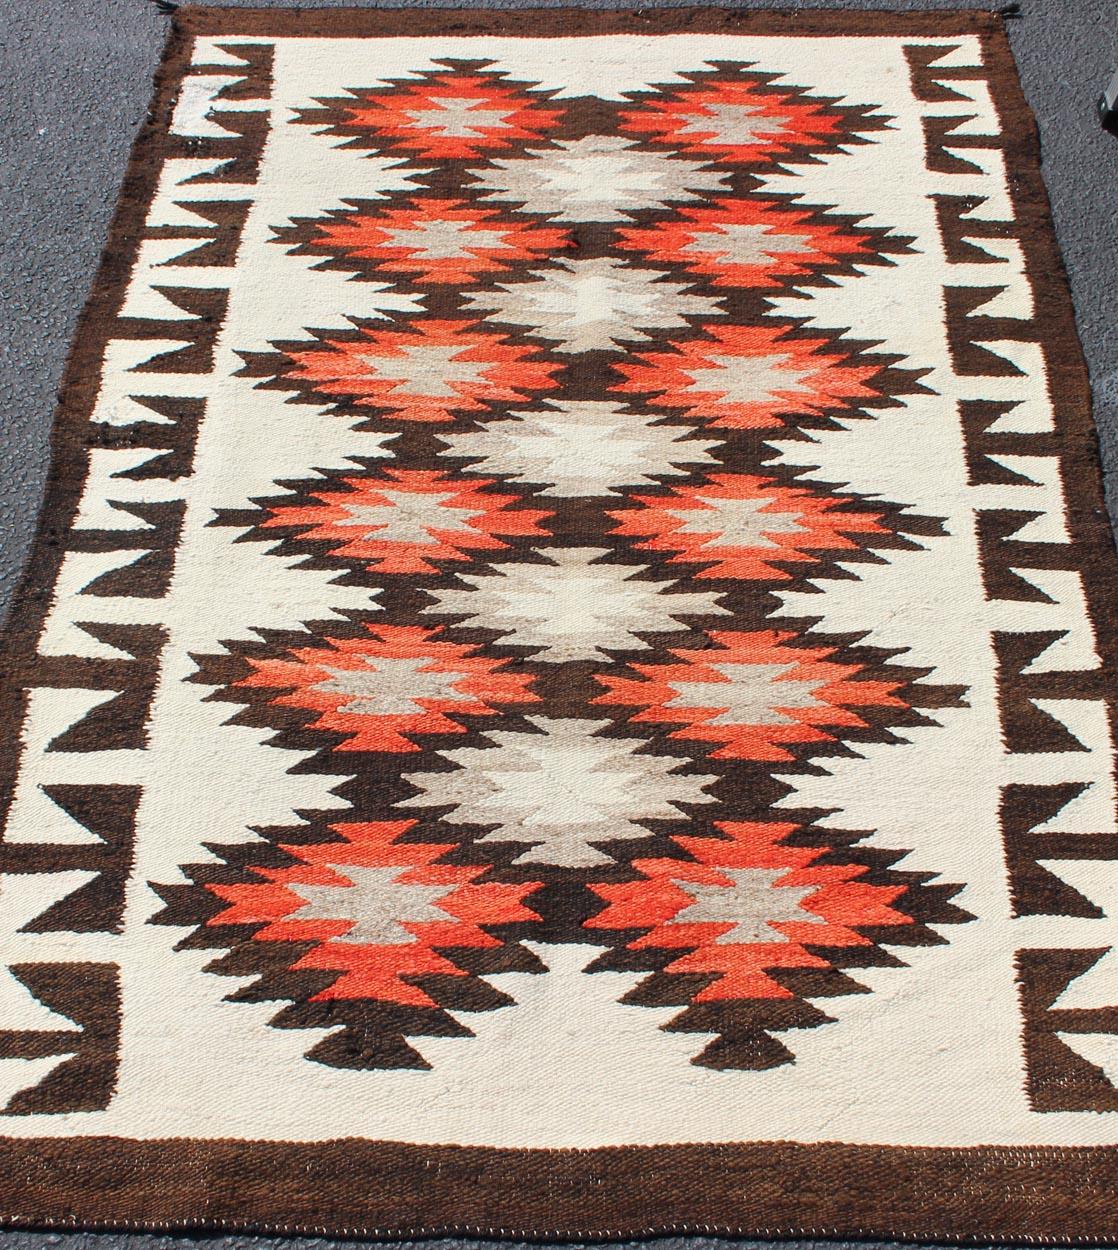 Vintage American Navajo Tribal Rug with Diamonds in Brown, Orange and Ivory For Sale 3